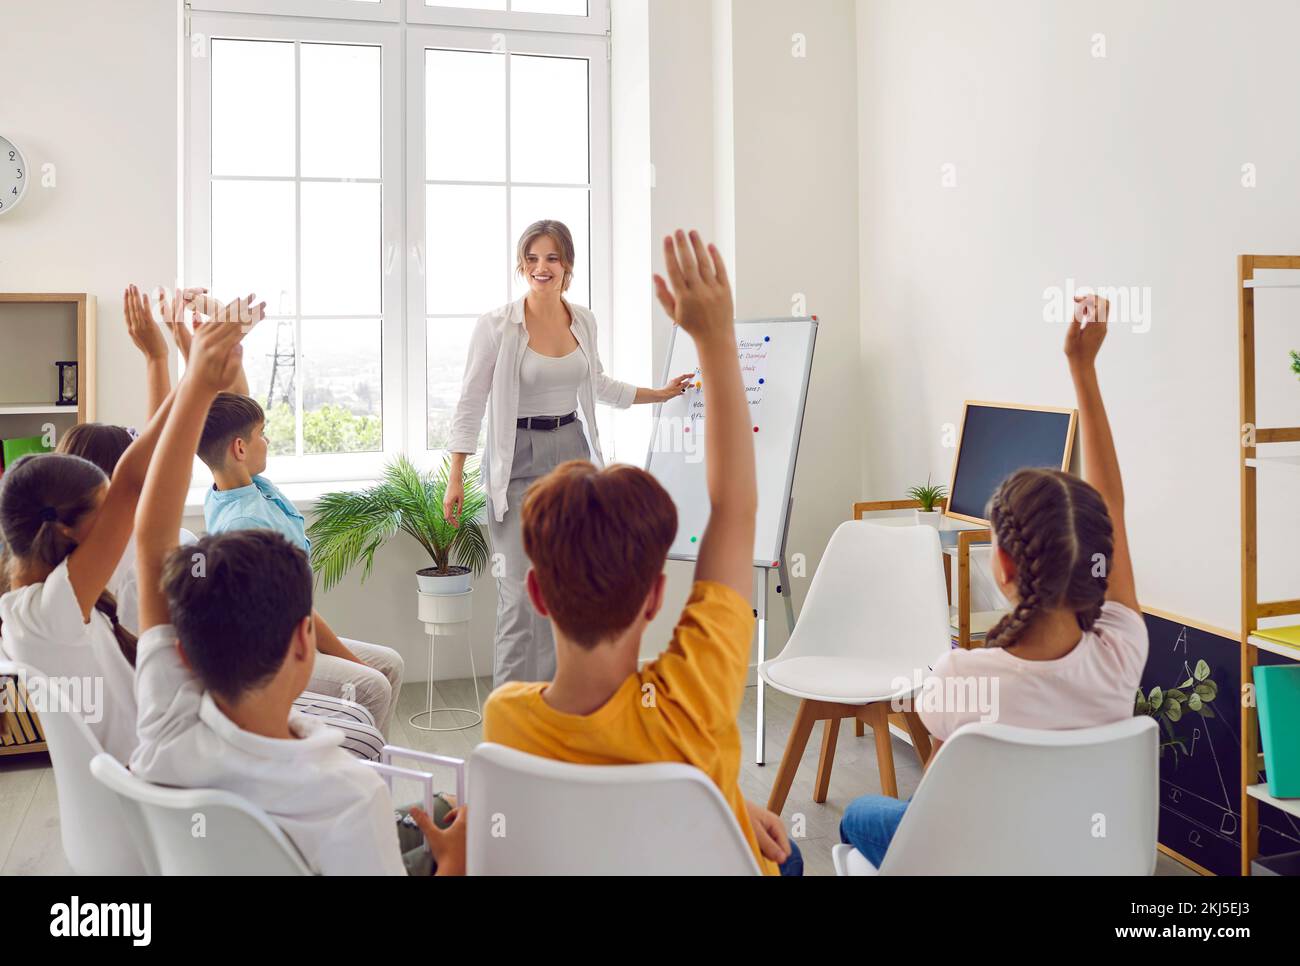 Selective focus on hand. Children or Schoolkids or students raising hands up with teacher. Stock Photo